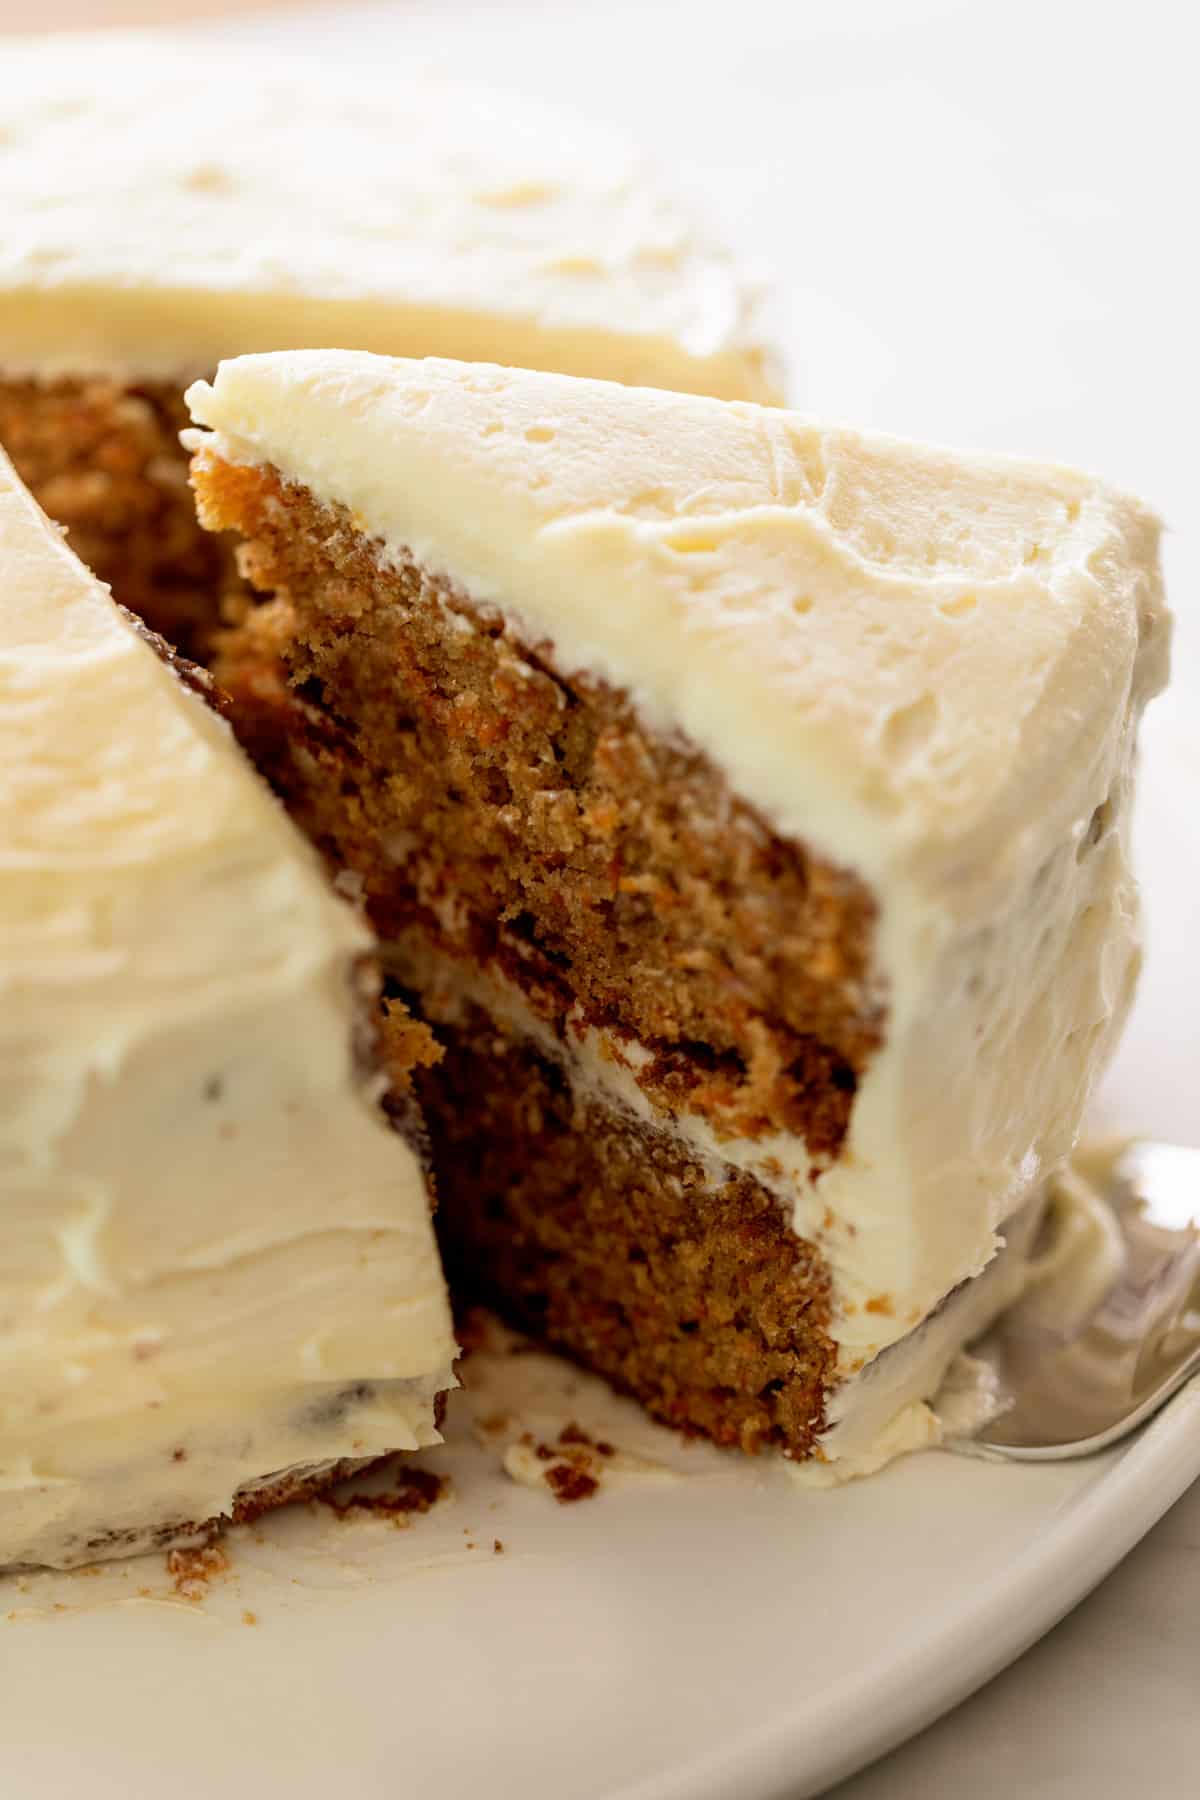 To Die For Carrot Cake - My Nana's Foolproof Recipe!